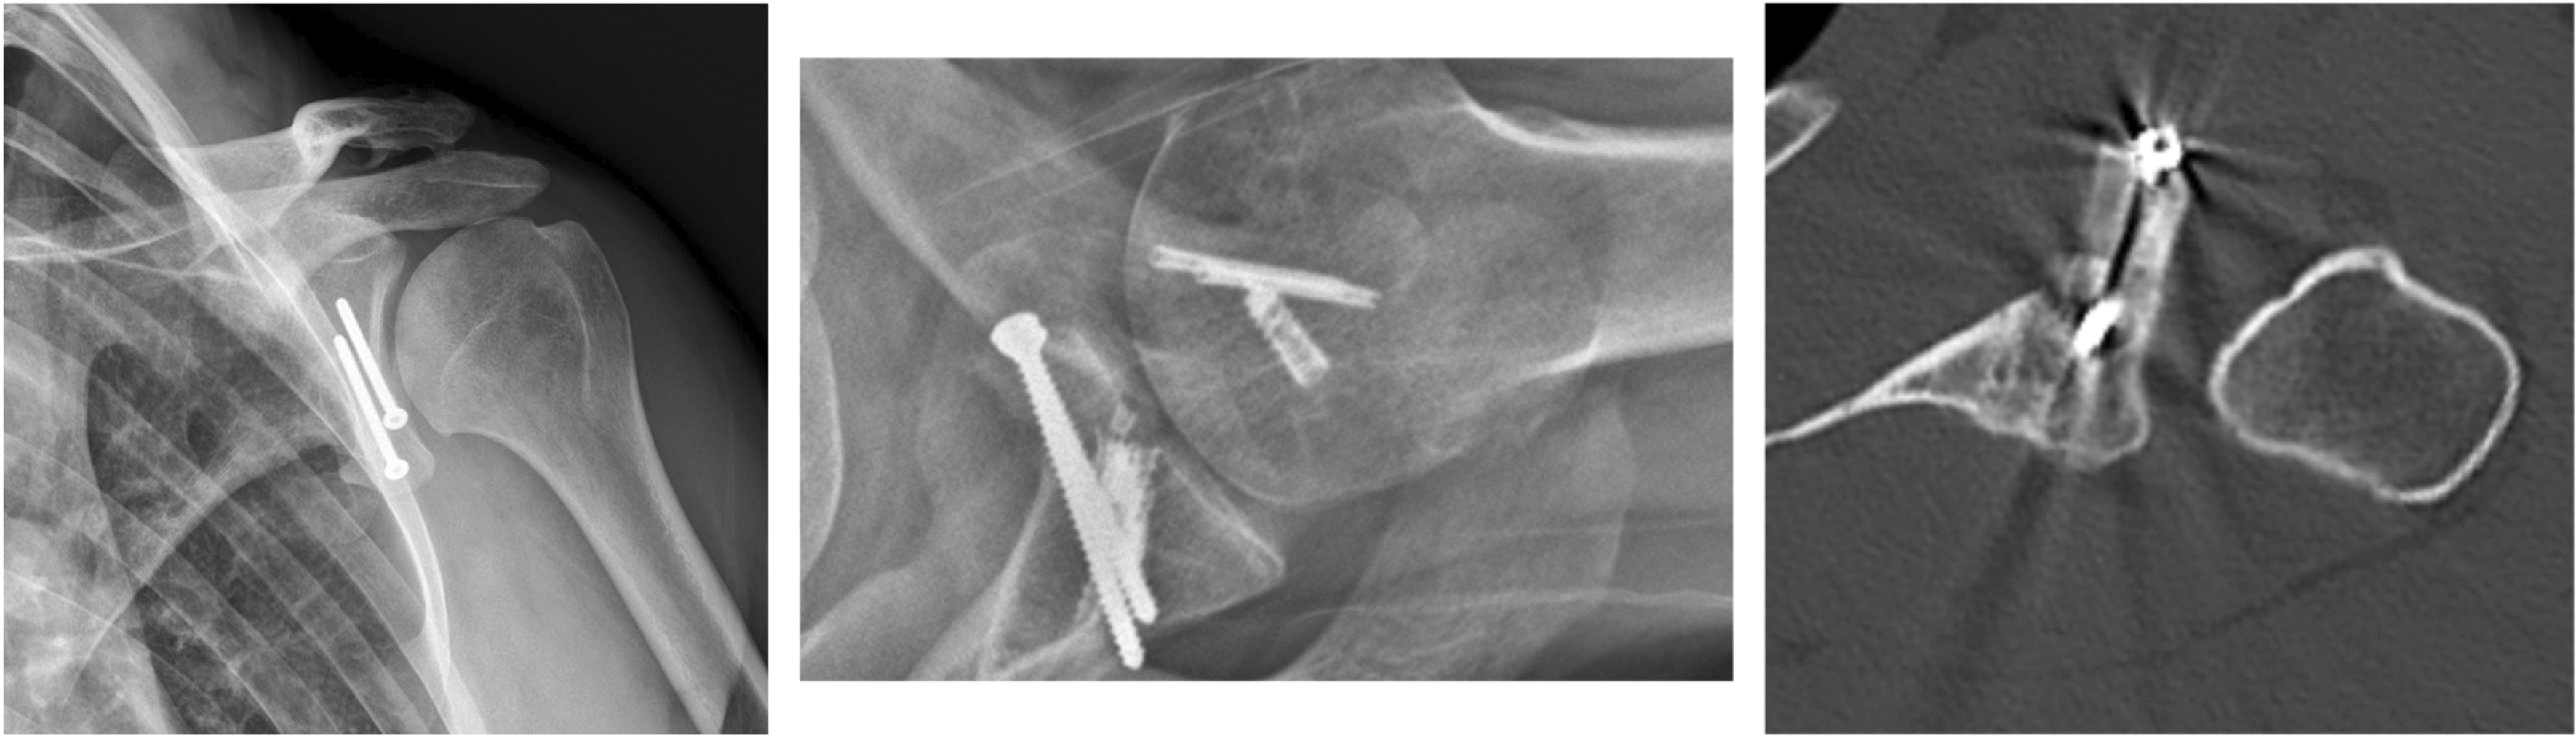 Sutures, Screws, Buttons, and Anchors: A Review of Current Bone Graft Fixation Devices for Glenoid Bone Loss in the Unstable Shoulder